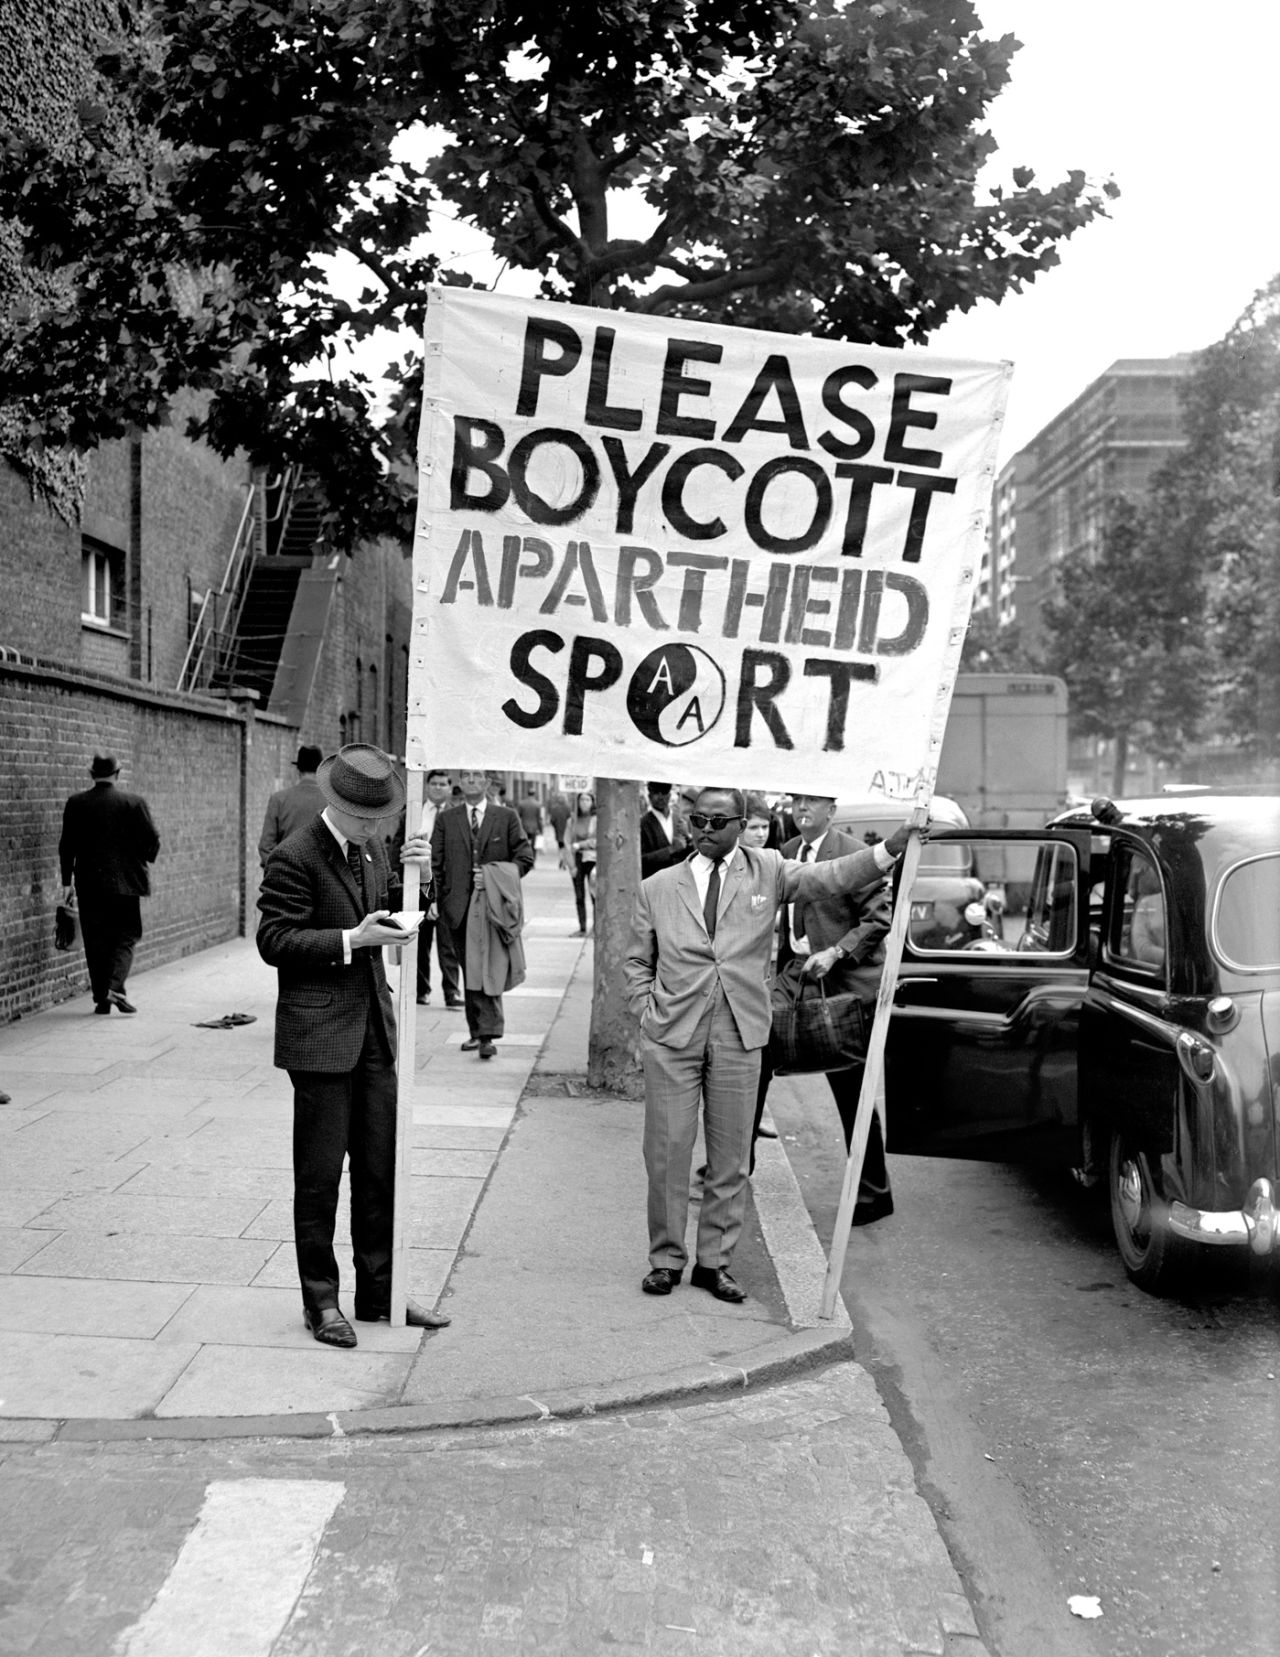 Protests hold up an anti-apartheid banner outside Lord's, England v South Africa, 1st Test, Lords, 1st day, July 22, 1965